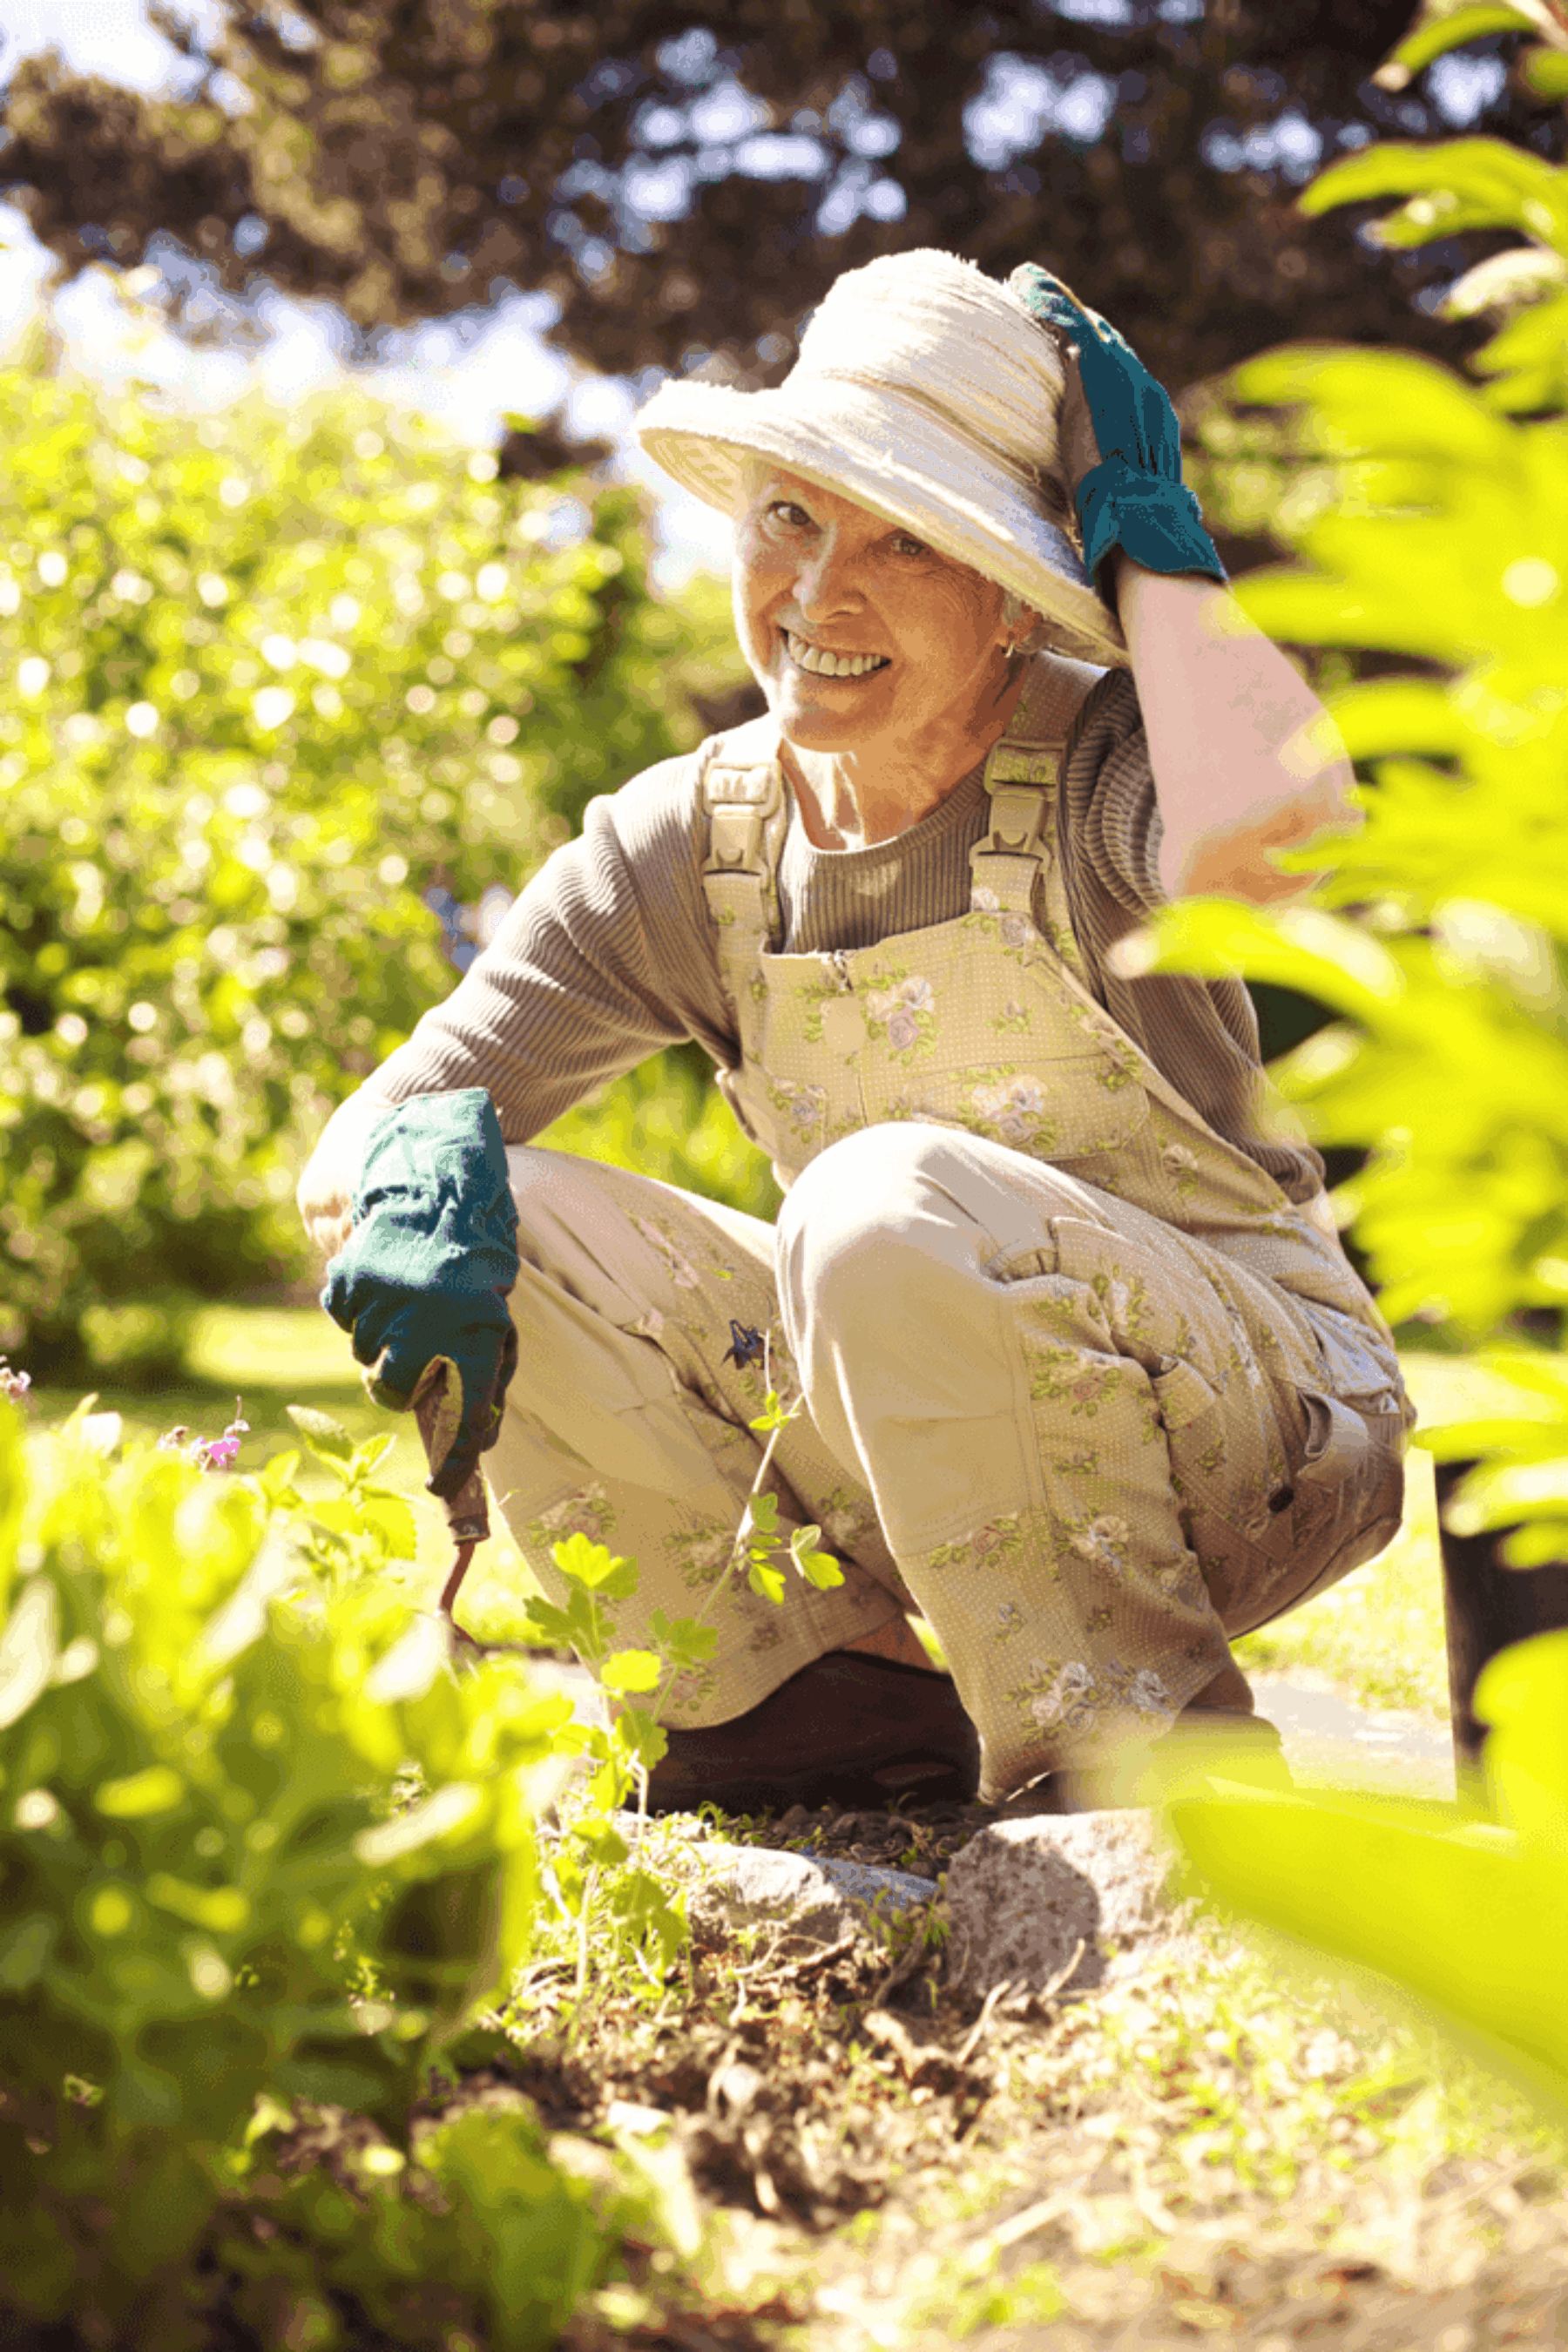 Woman squatting down while gardening, surrounded by plants, has her hand on her wide-brimmed hat.